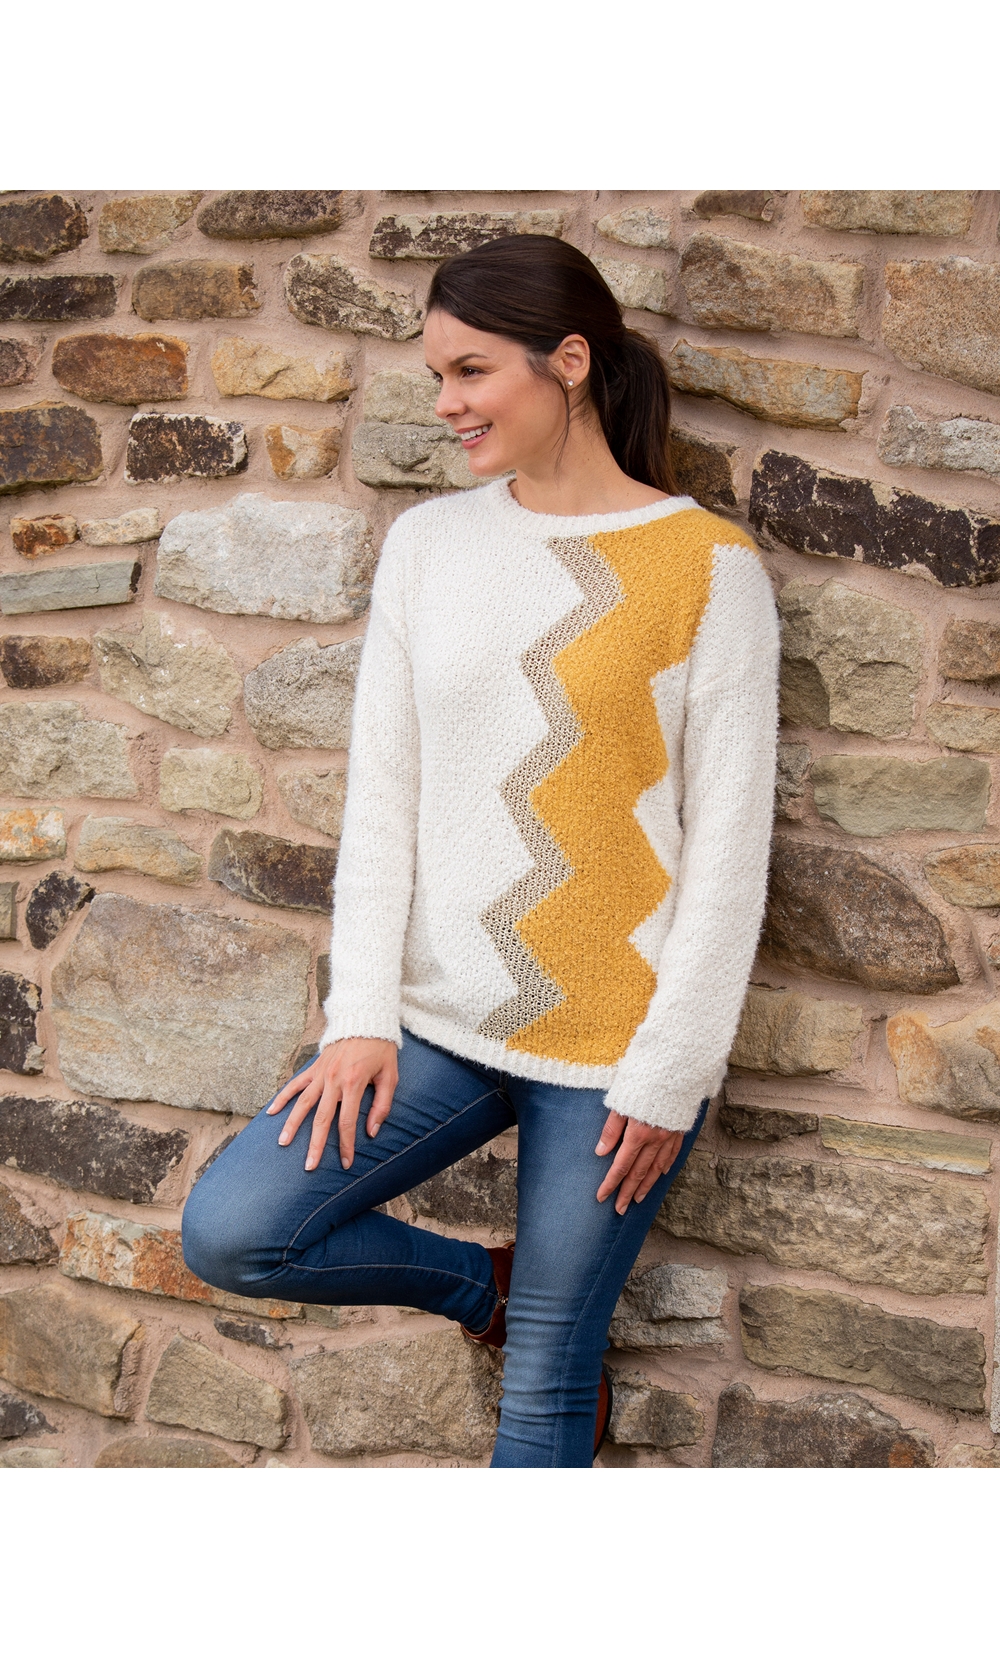 Zig-Zag Patterned Knitted Top